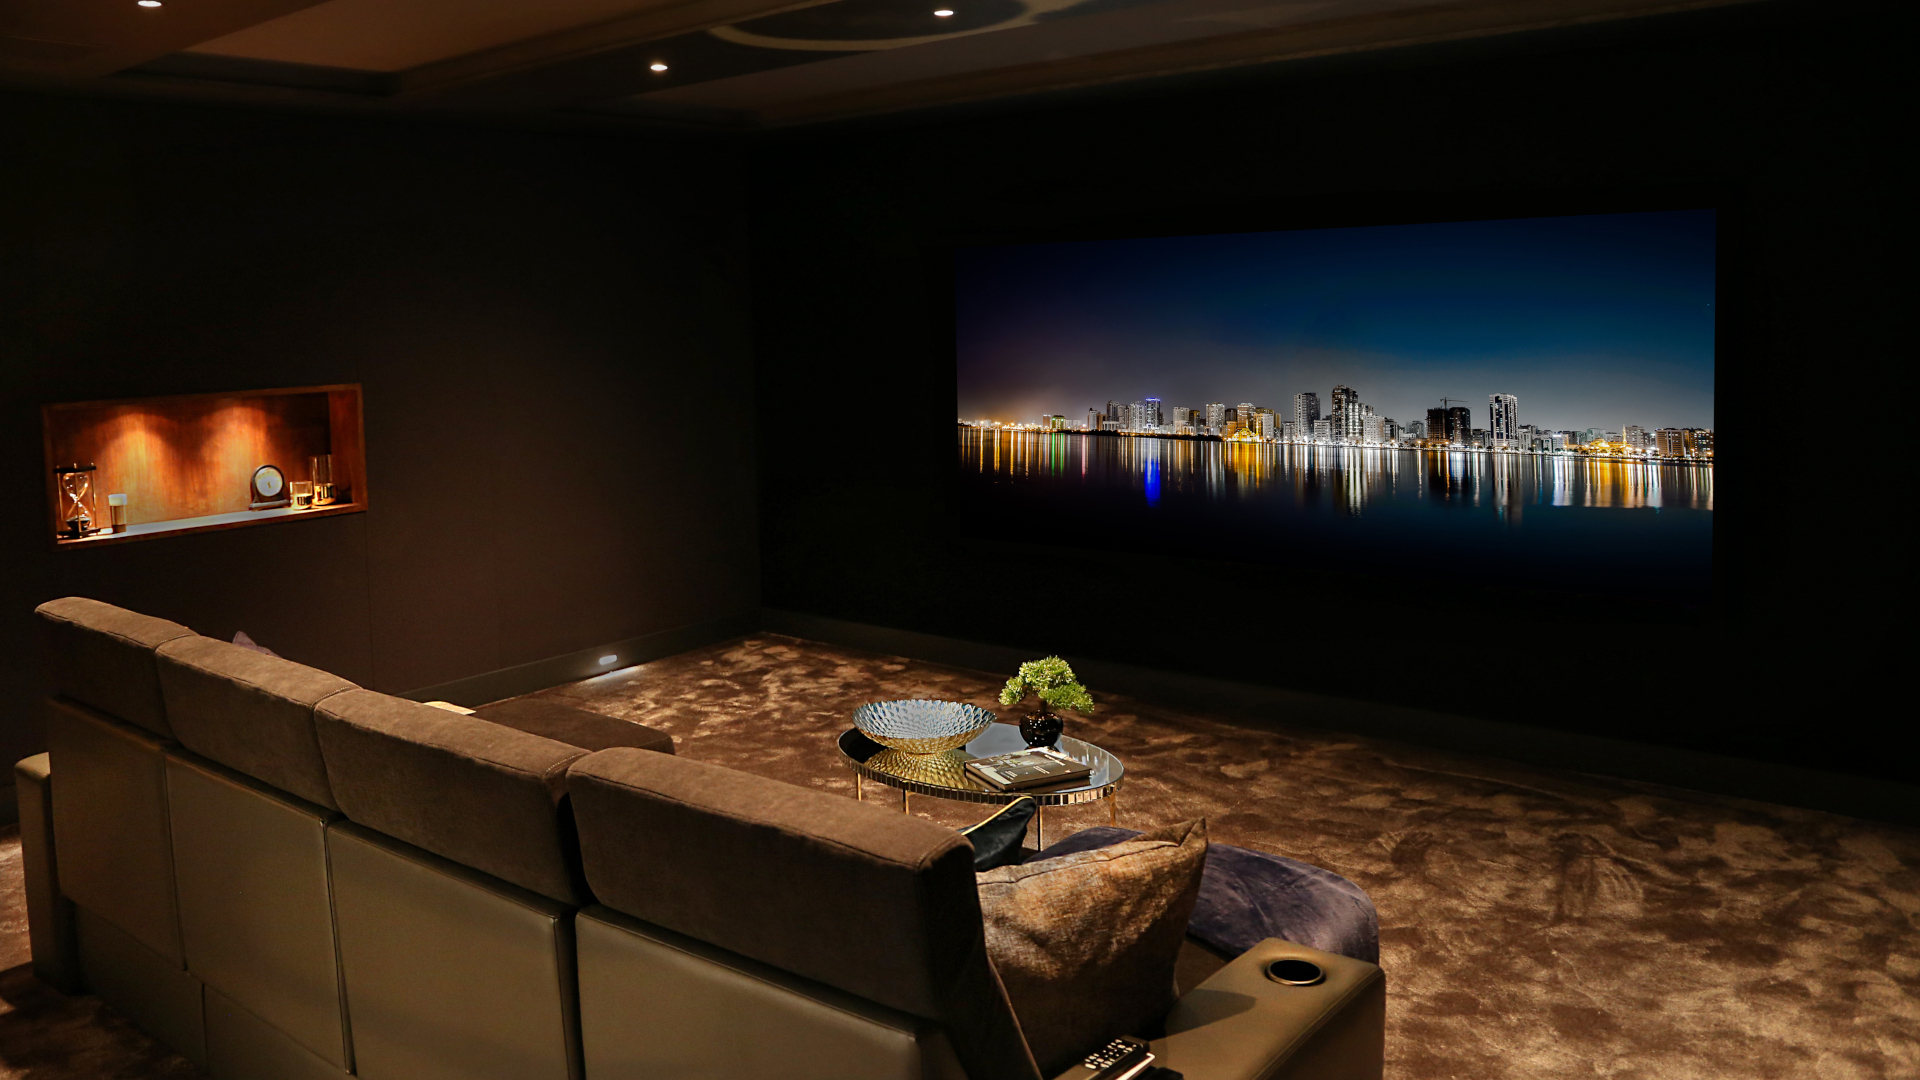 The JVC DLA-NZ8 setup in a home theater.